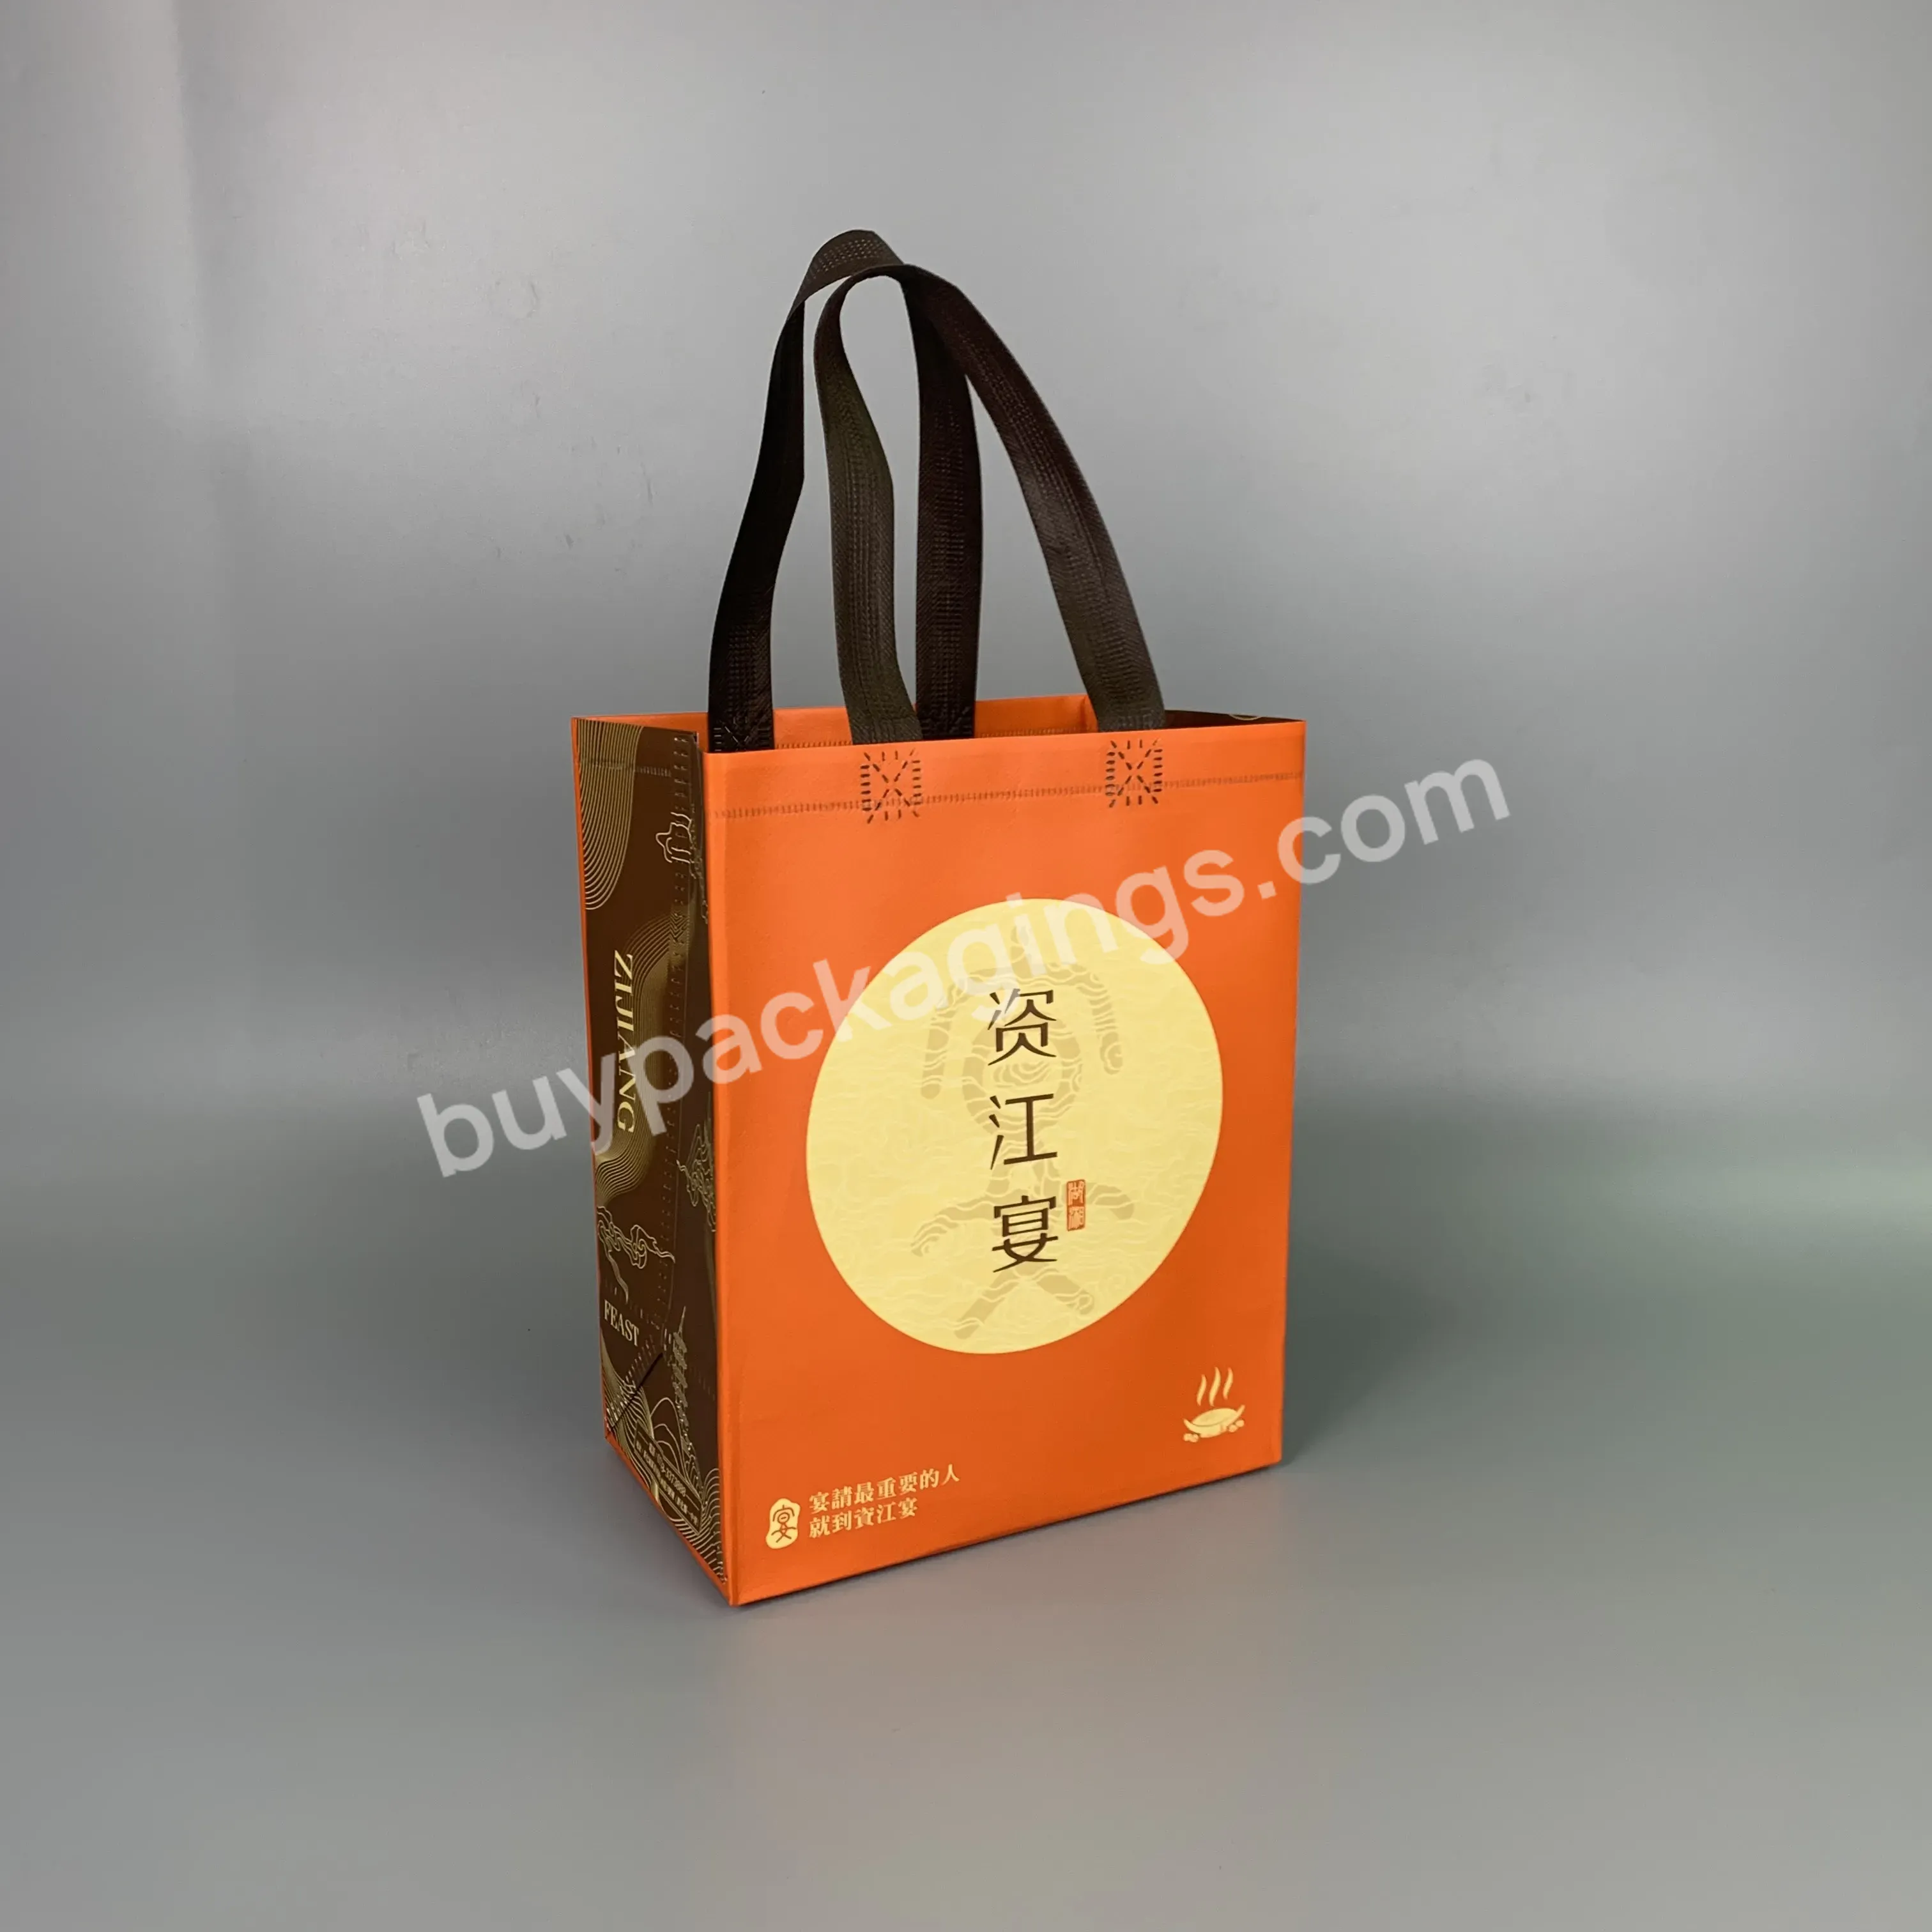 China Factory Eco Friendly Wholesale And Durable Foldable Waterproof Non Woven Food Shopping Bag With Handle - Buy Non Woven Food Shopping Bag With Handle,Non Woven Bag With Handle,Foldable Waterproof Non Woven Bag.